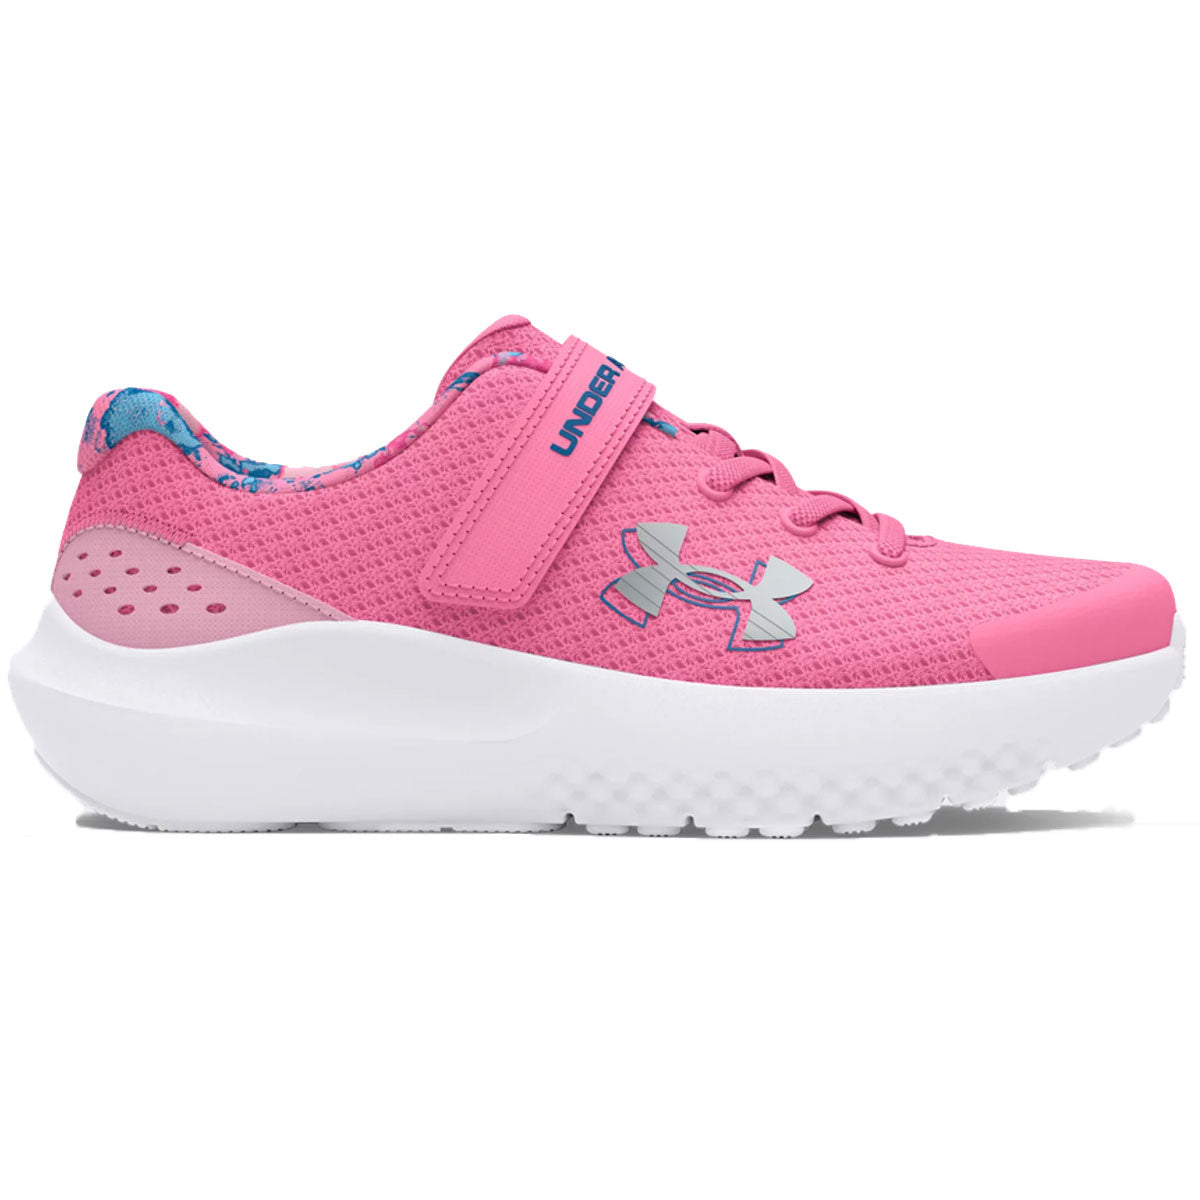 Under Armour GGS Surge 4 AC Print Trainers - Girls - Sunset Pink/Pink/Metallic Silver